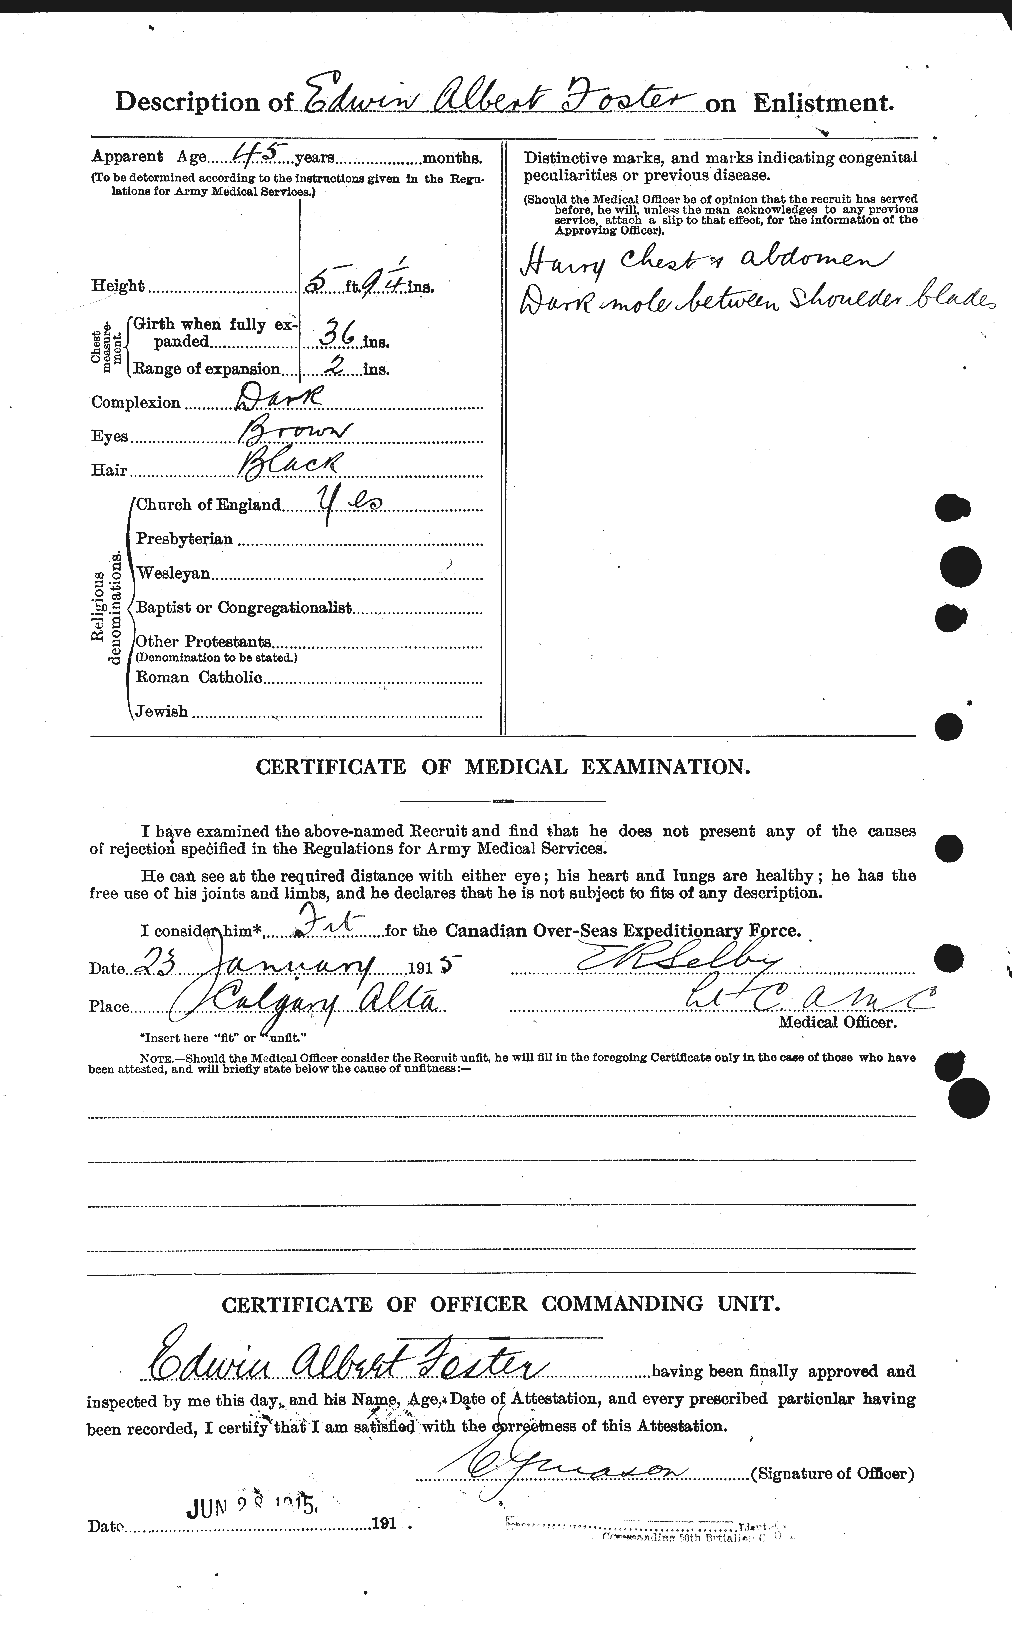 Personnel Records of the First World War - CEF 330591b